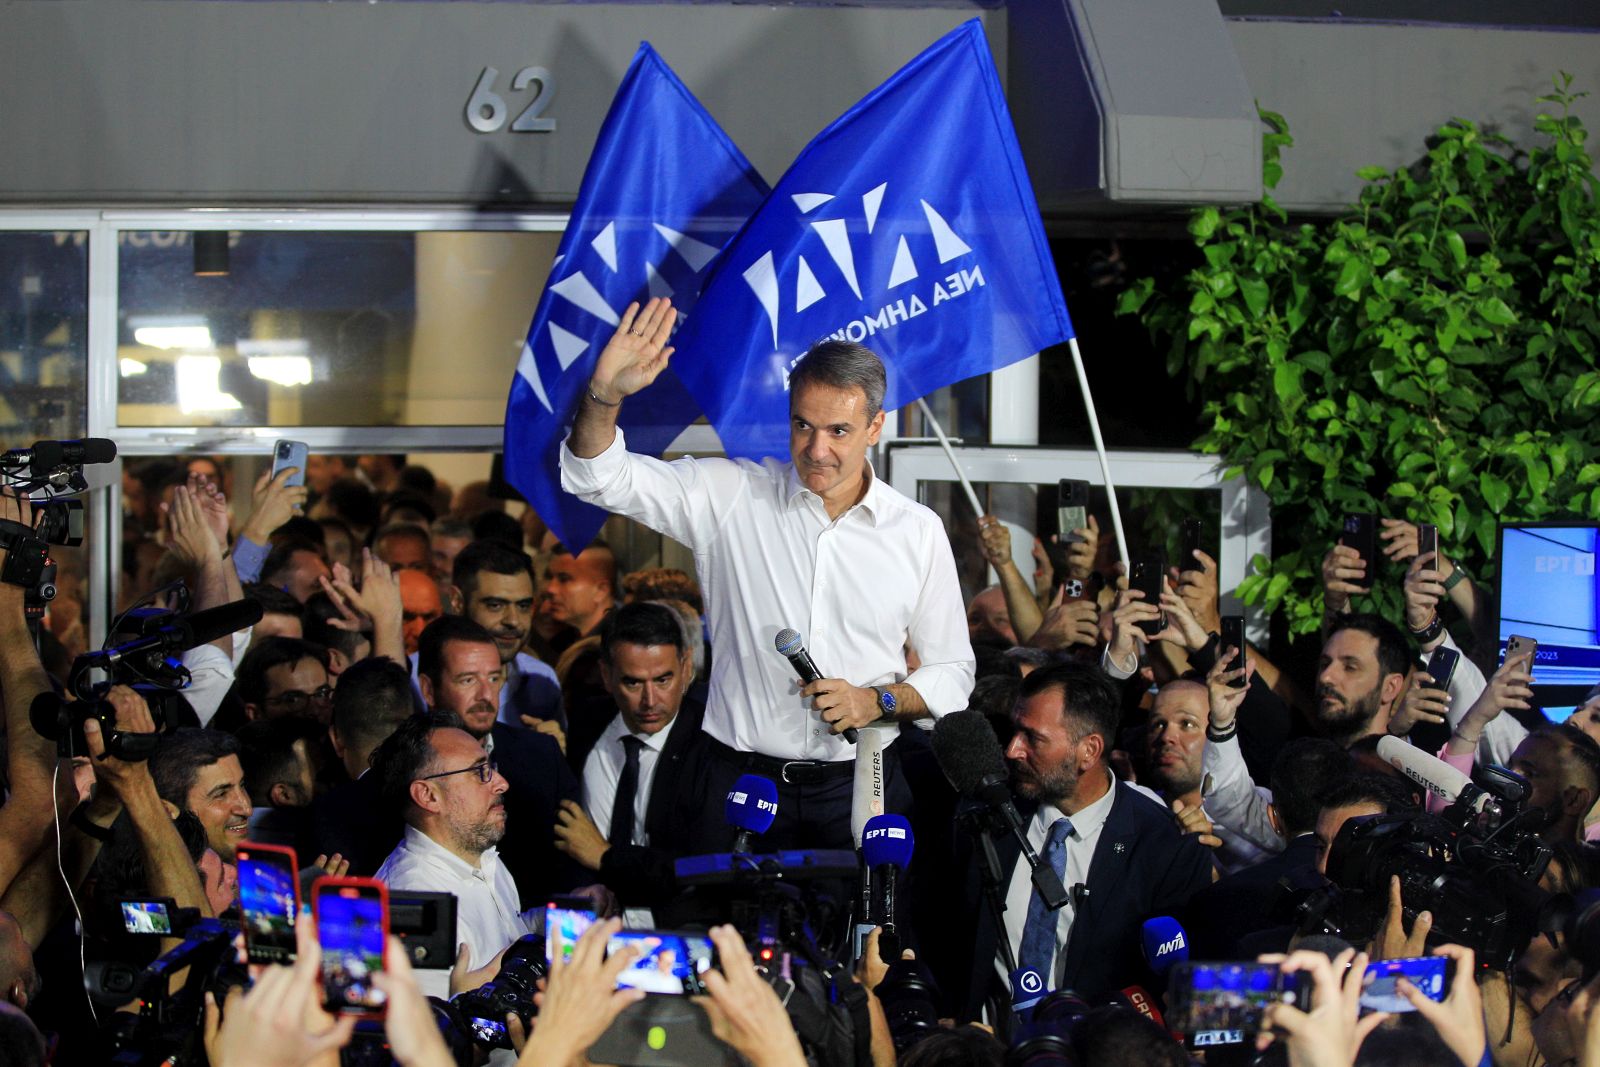 epa10711323 Leader of New Democracy political party Kyriakos Mitsotakis (C) greets supporters after the announcement of the first results in the Greek general elections, at the party's headquarters, in Athens, Greece, 25 June 2023. With nearly 90 percent of the votes counted, New Democracy will form a stand-alone government for a second term with 158 seats in a 300-seat Parliament and 40.51 percent of the votes, followed by SYRIZA with 47 (17.84 percent) and PASOK-KINAL with 32 seats (11.97 percent). Greece held its second general election in five weeks on June 25, after current Prime Minister Mitsotakis won the May 2023 elections but fell short of enough seats in parliament to form a government.  EPA/ALEXANDROS VLACHOS